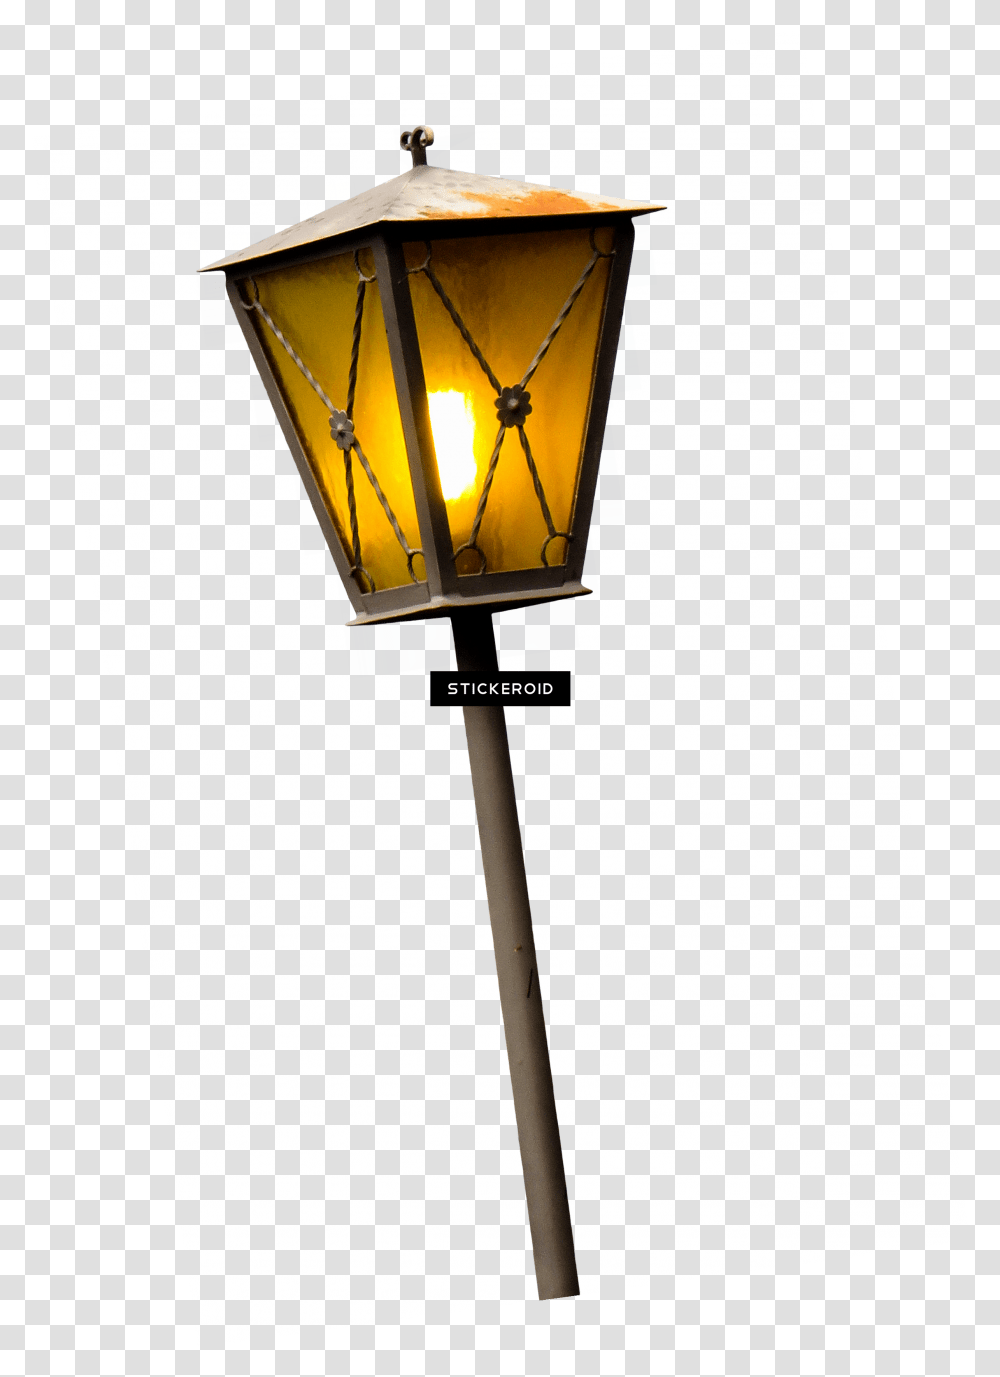 Download Street Light Image With No Street Light, Lamp, Lamp Post, Lampshade Transparent Png